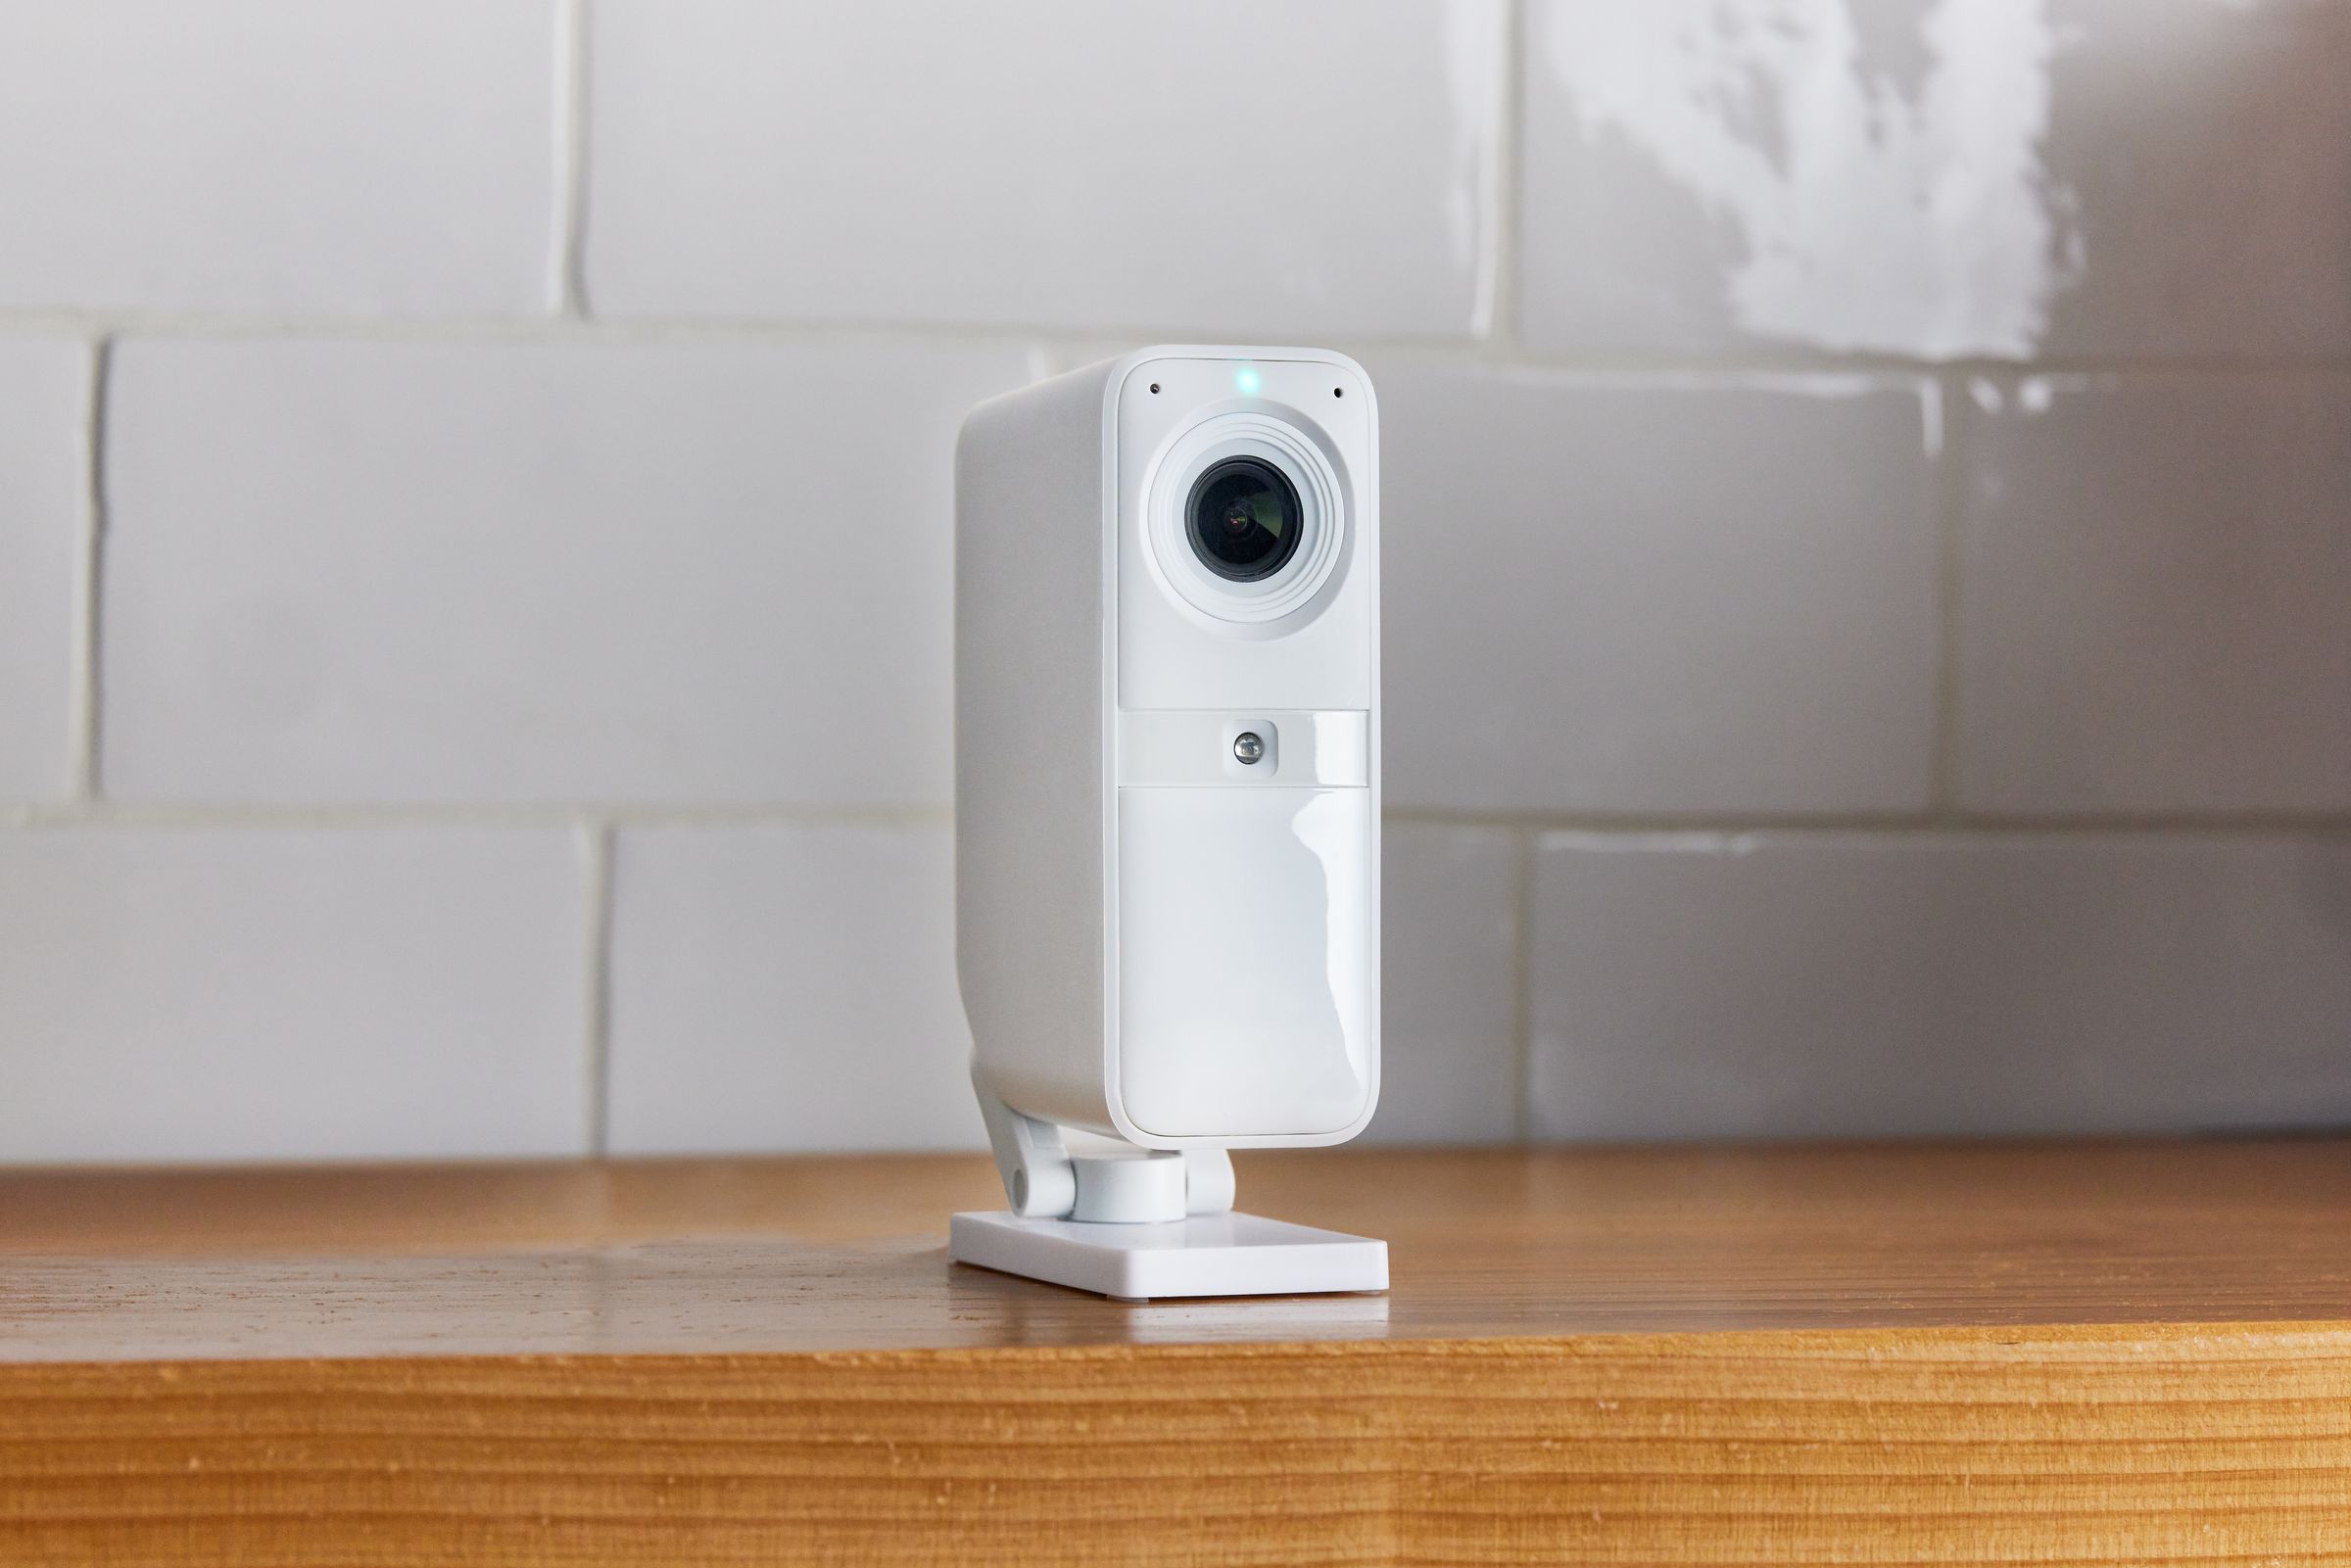 The new SmartAlarm camera has a mechanical privacy shutter and captures 1536 x 1536p HD video. Its built-in battery lasts up to three months and can be powered or charged by a micro-USB cable.